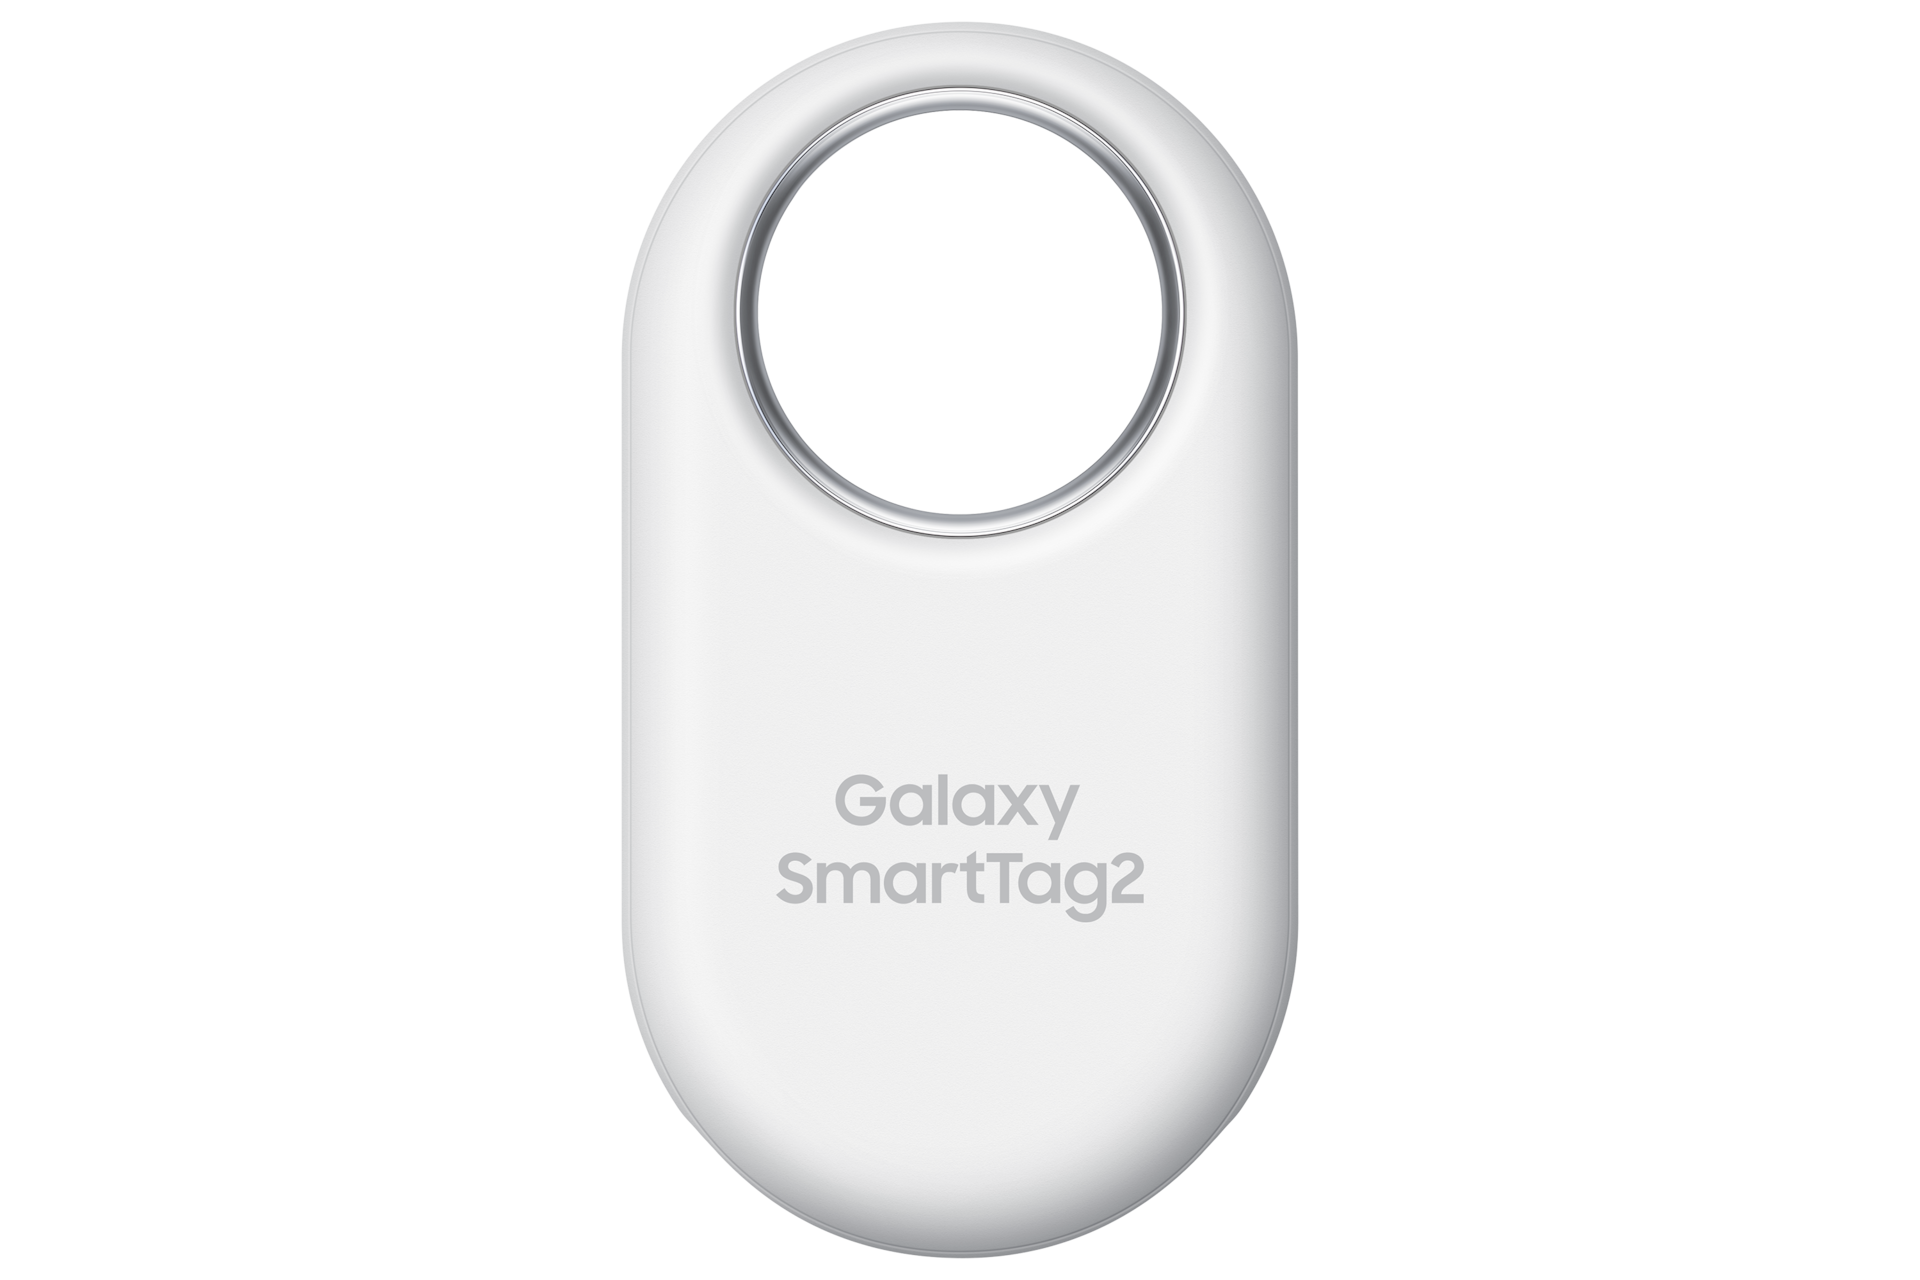 Samsung's Galaxy SmartTag 2 spotted in new listing - Android Authority